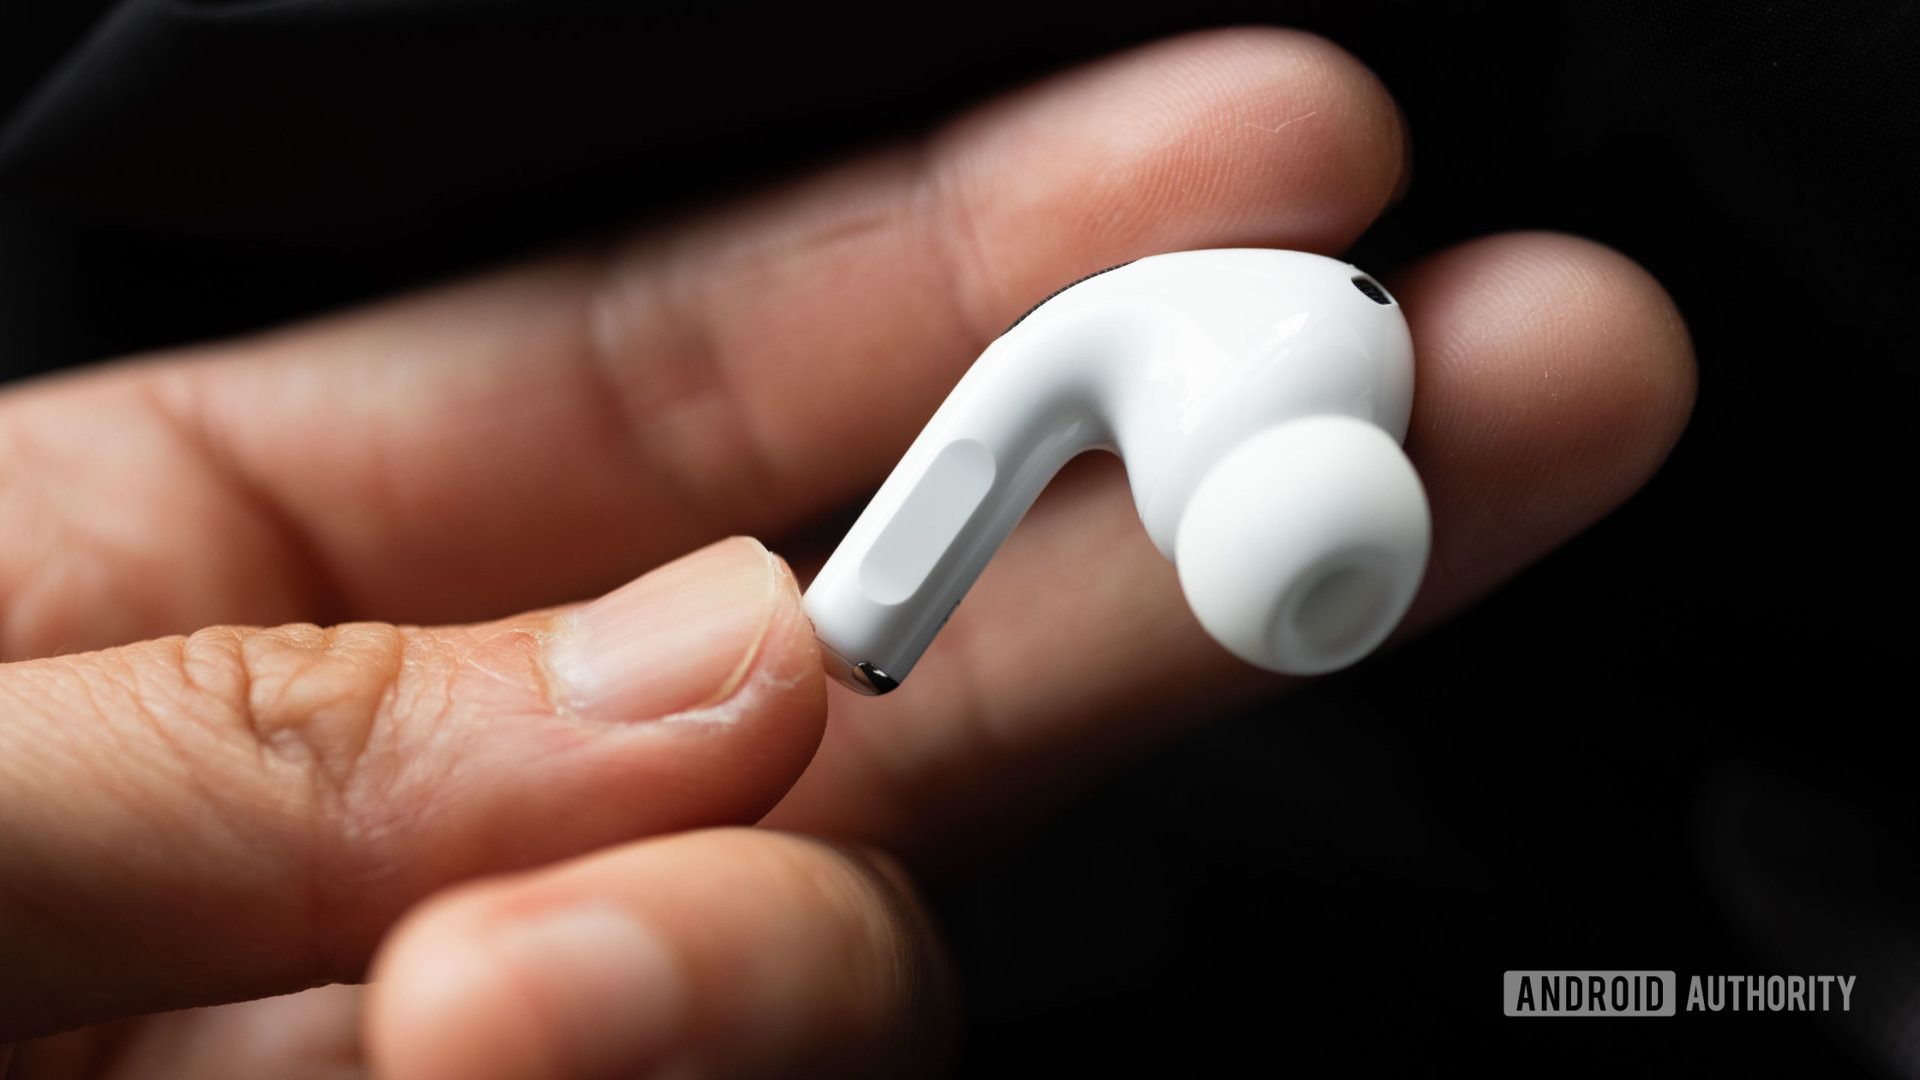 The wireless earbuds you can buy in Android Authority